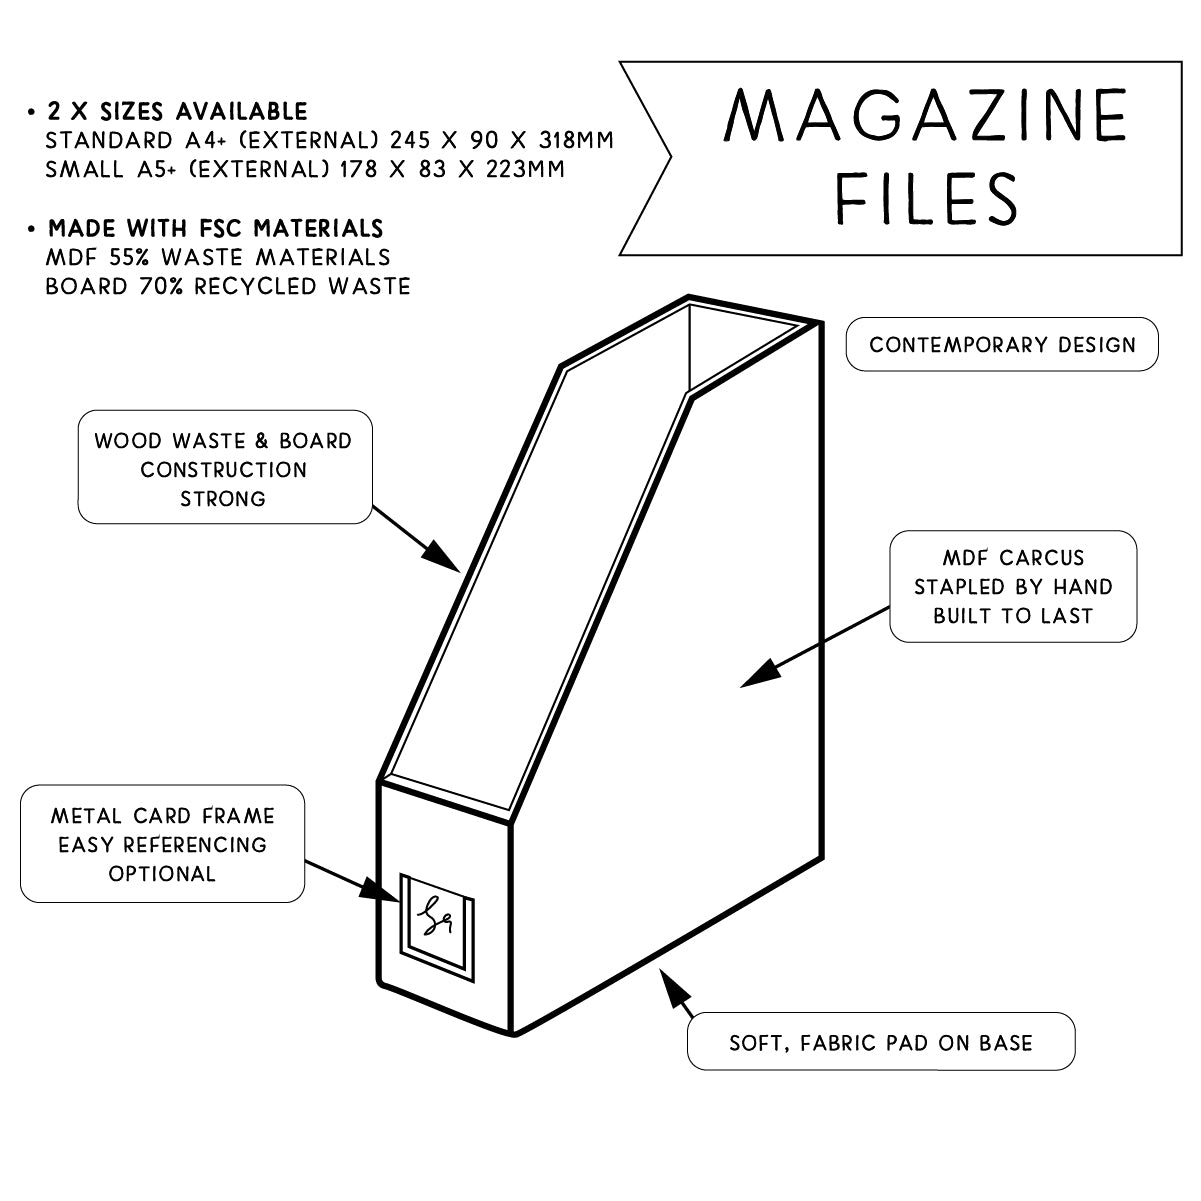 Faux Leather Magazine Files